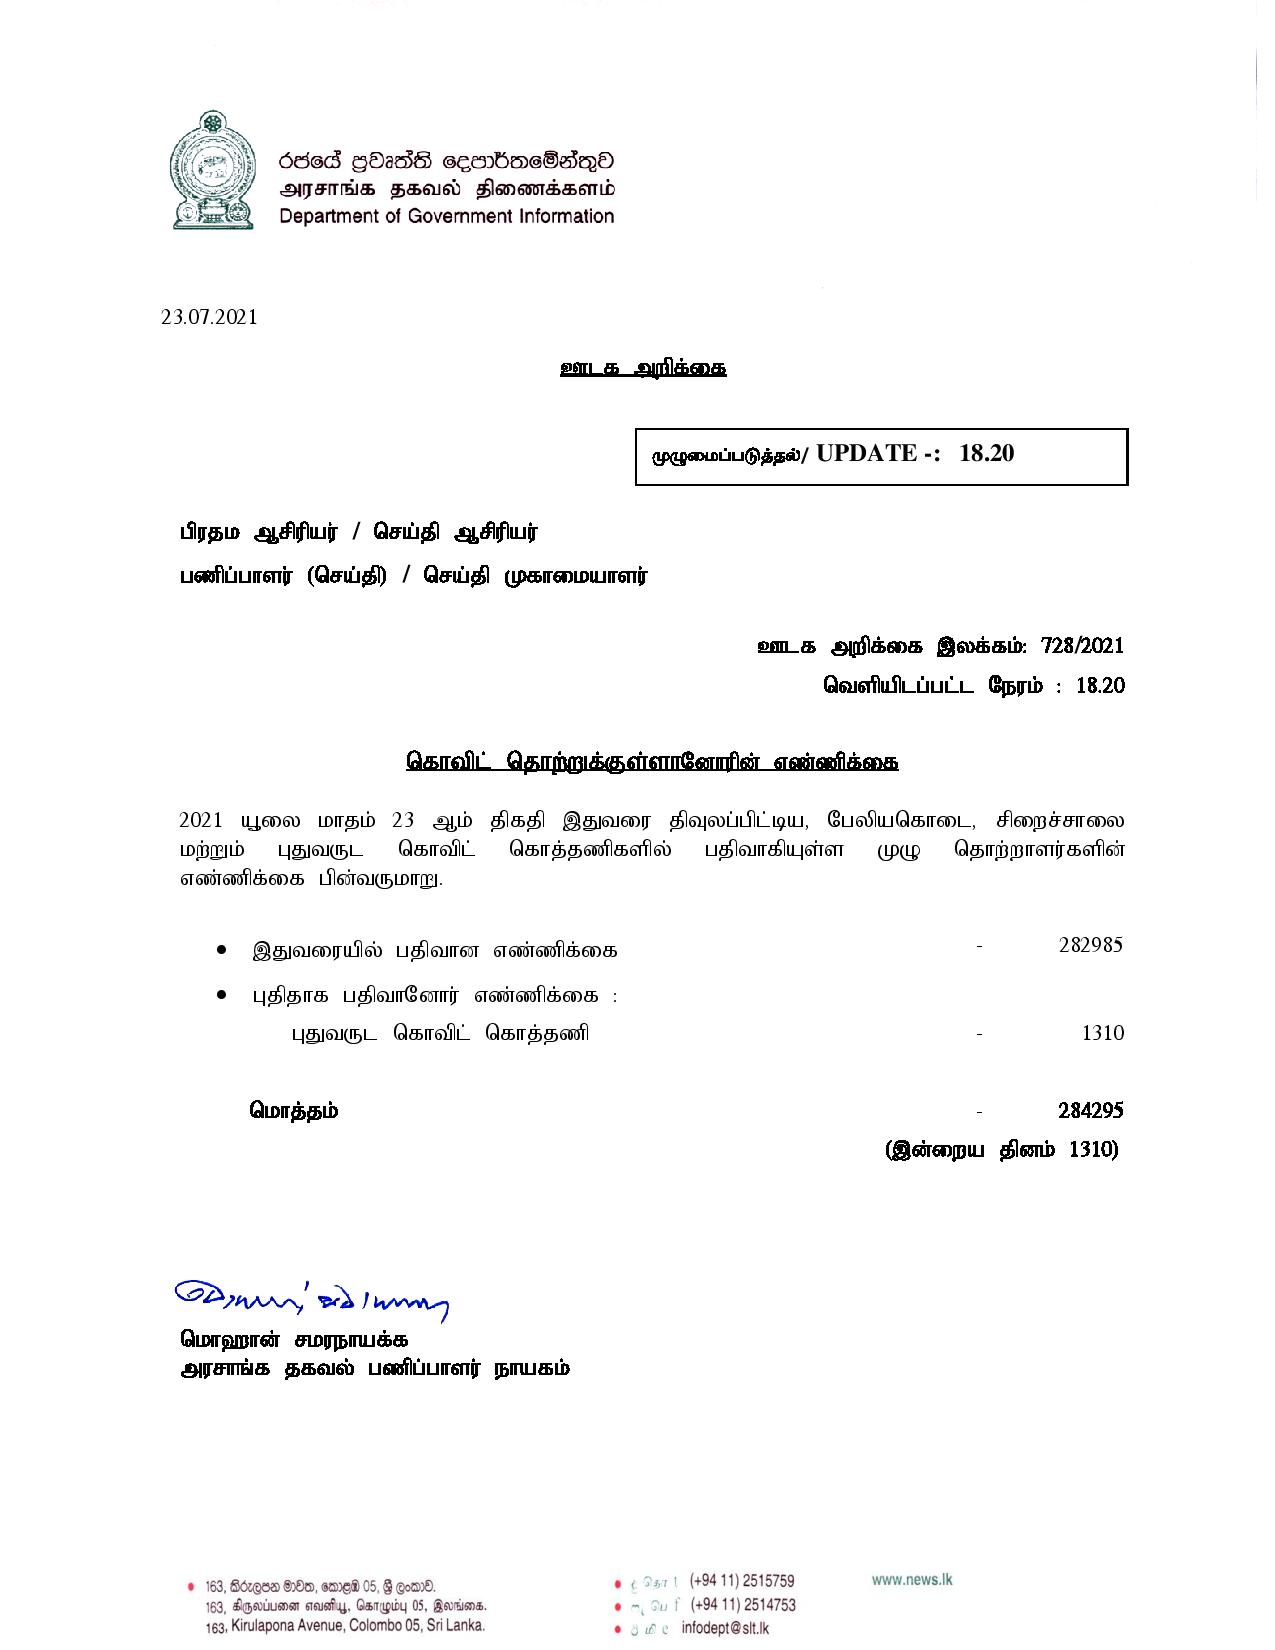 Press Release 728Tamil page 001